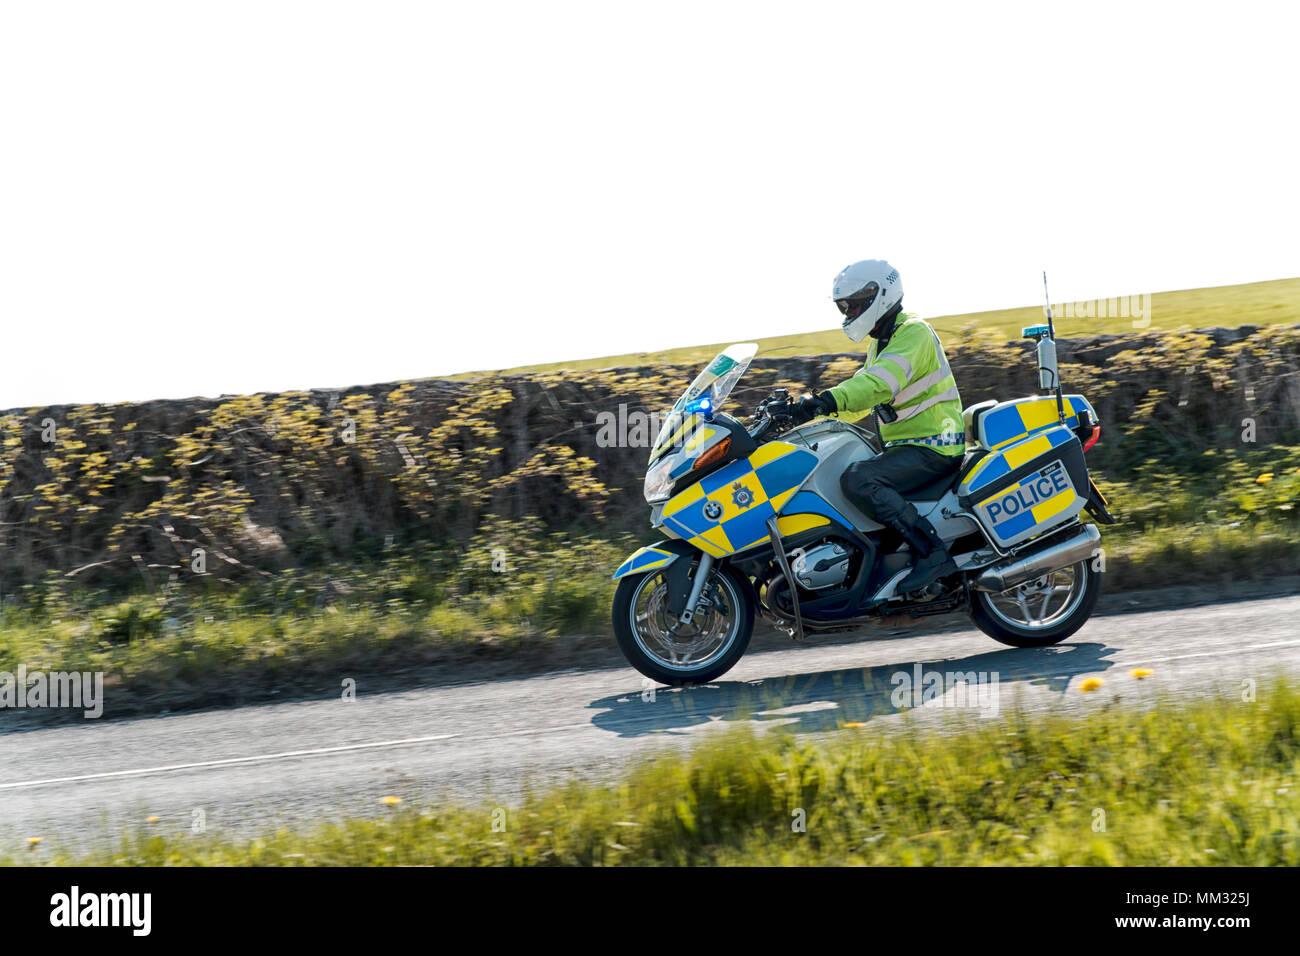 Emergency response Police Motorcycle in the Yorkshire Dales Stock Photo